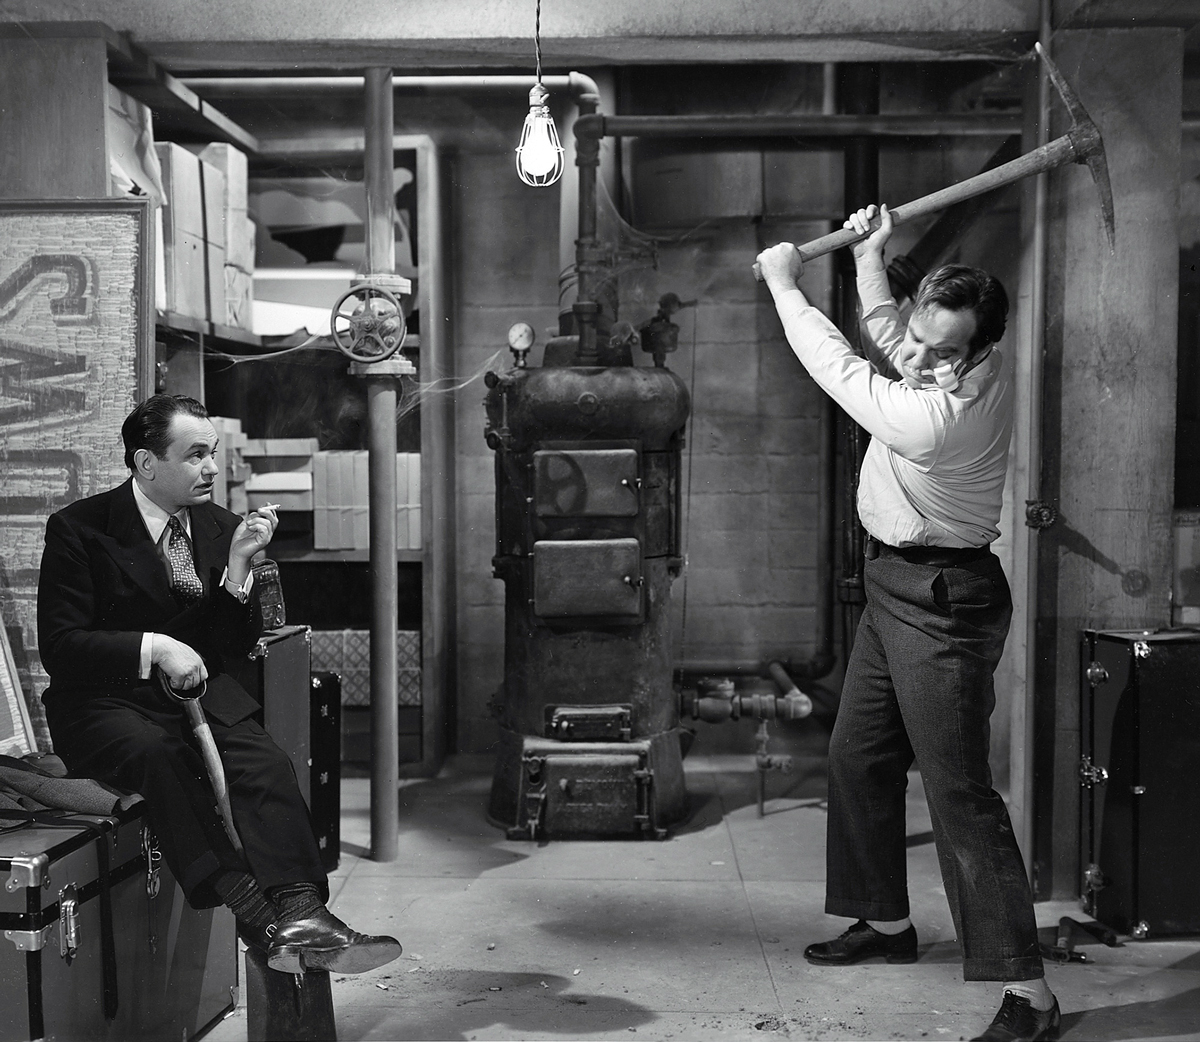 A film still from nineteen forty-two’s “Larceny, Inc.” It shows “Pressure” Maxwell (Edward G. Robinson) and Jug Martin (Broderick Crawford) getting to work on a bank burglary.